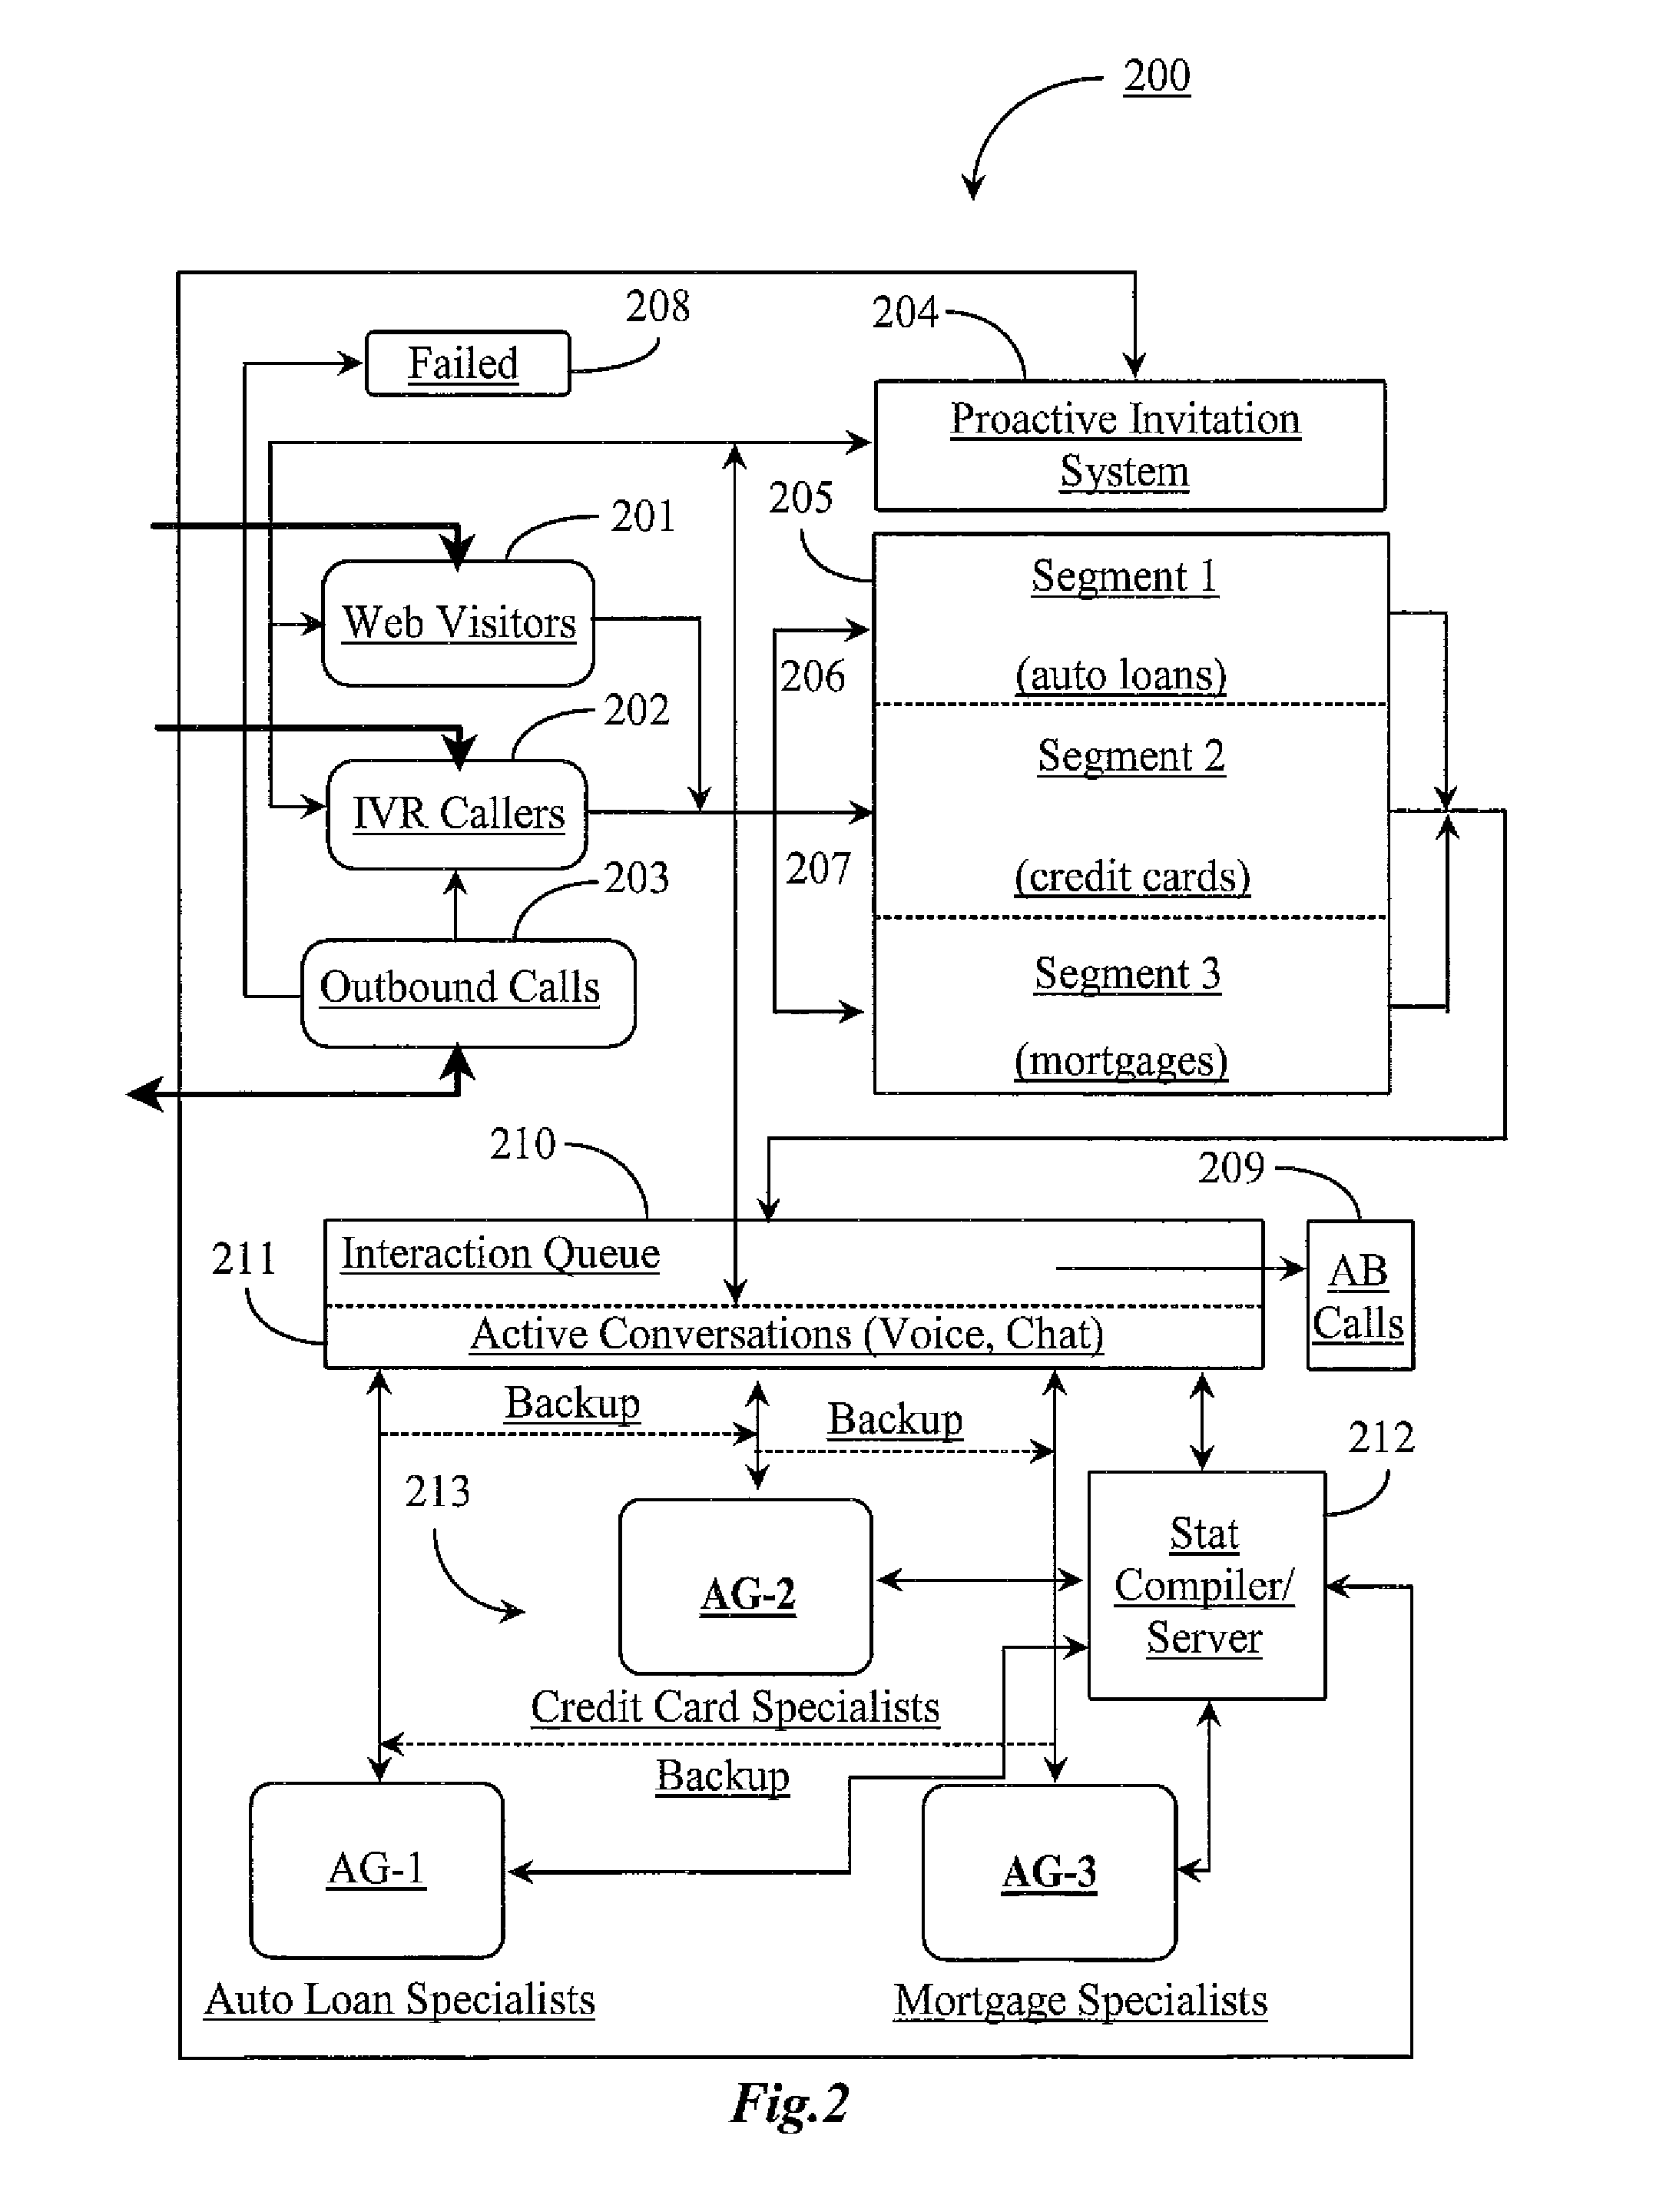 System for Creation and Dynamic Management of Incoming Interactions